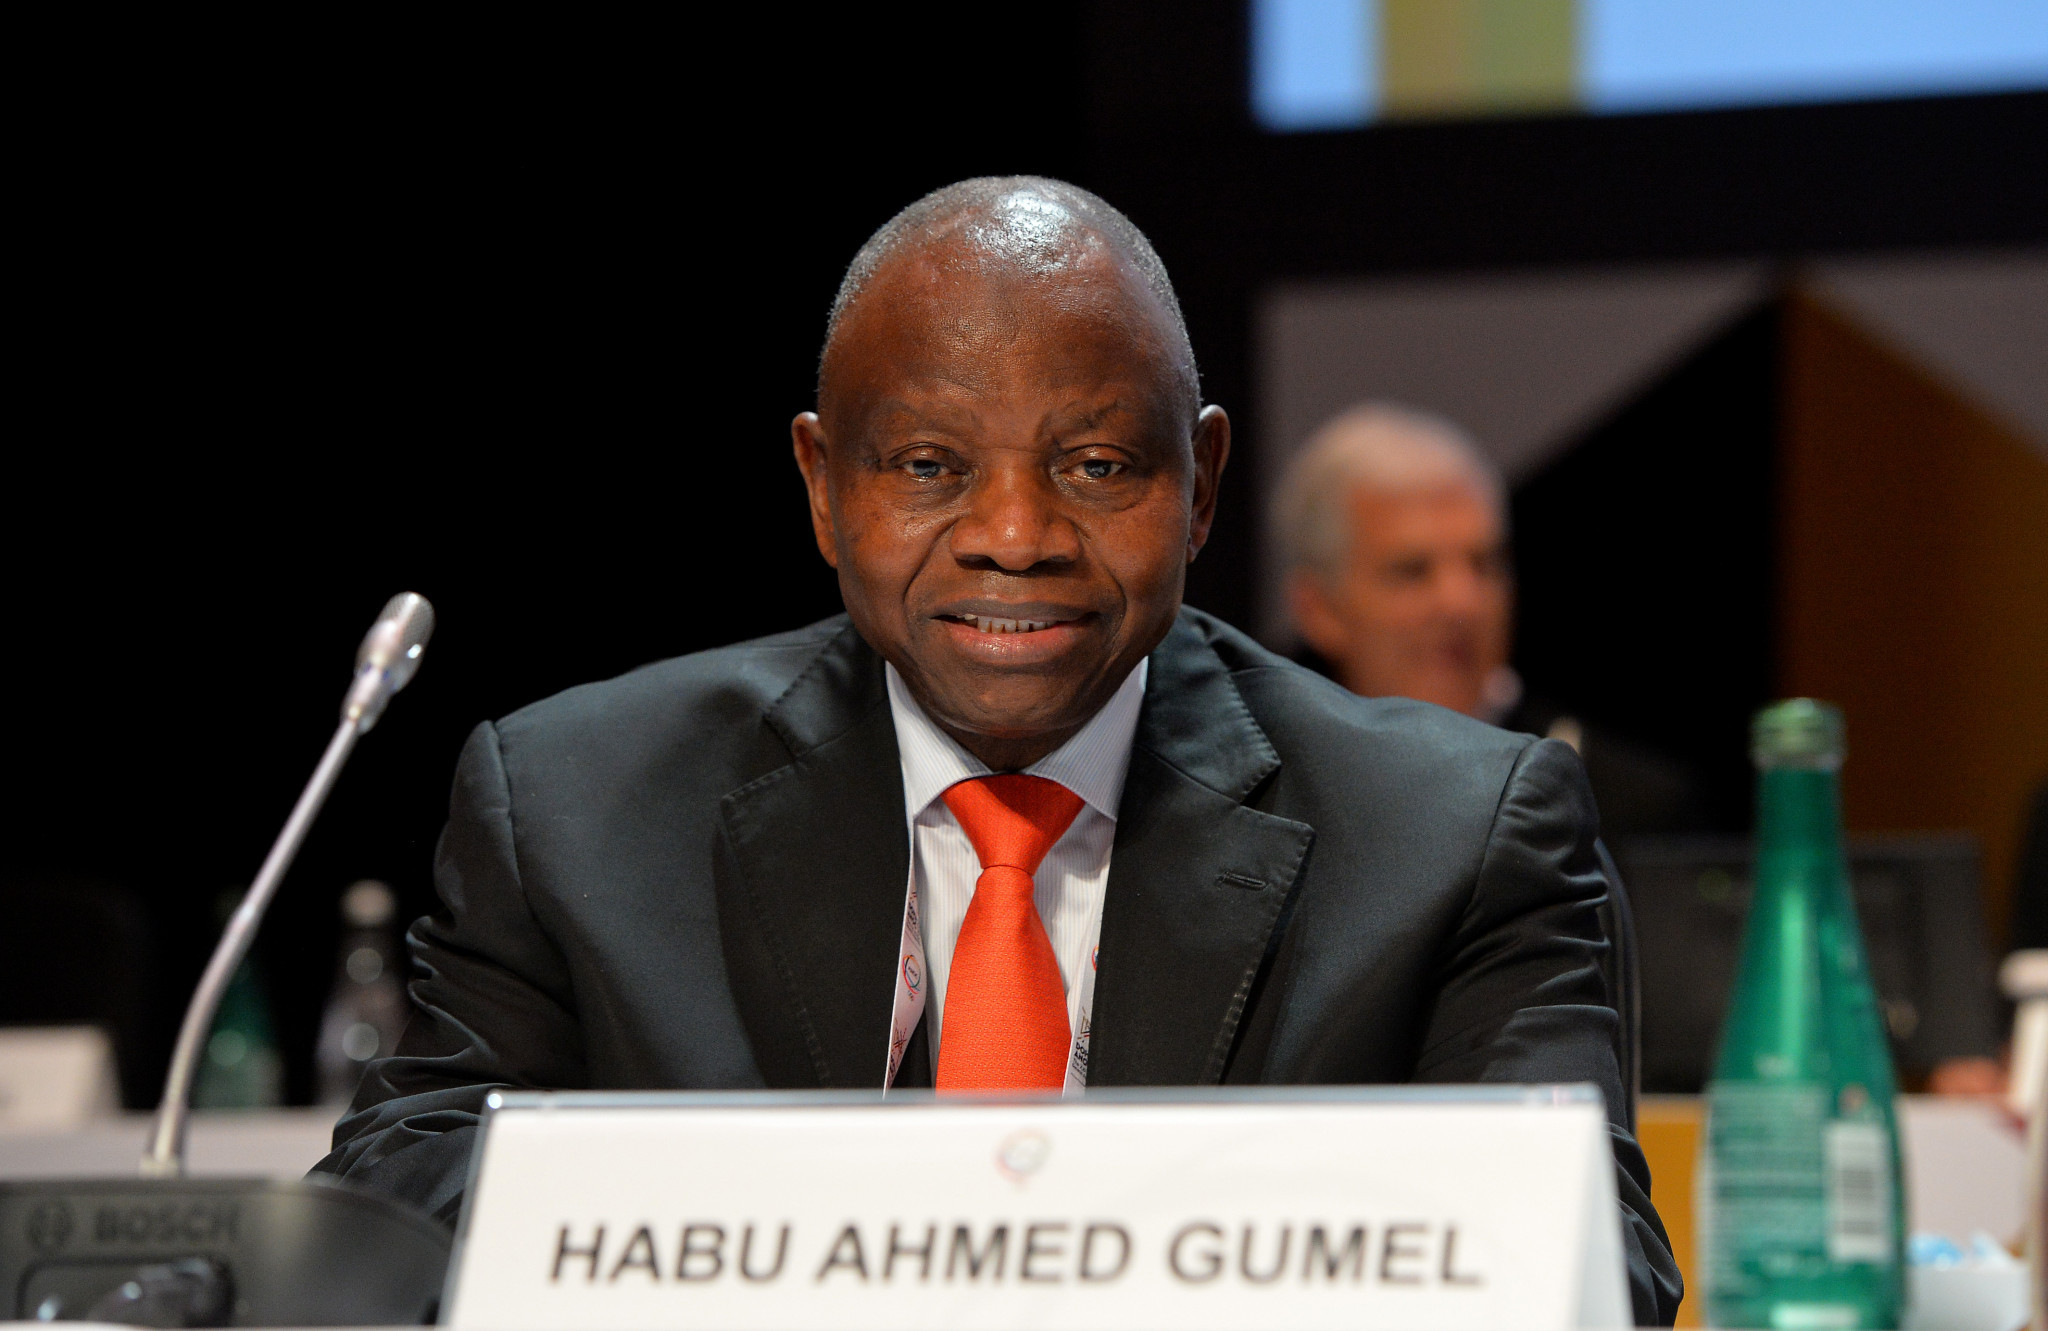 Habu Gumel has led the Nigeria Olympic Committee in two separate terms but is facing discontent ©Getty Images